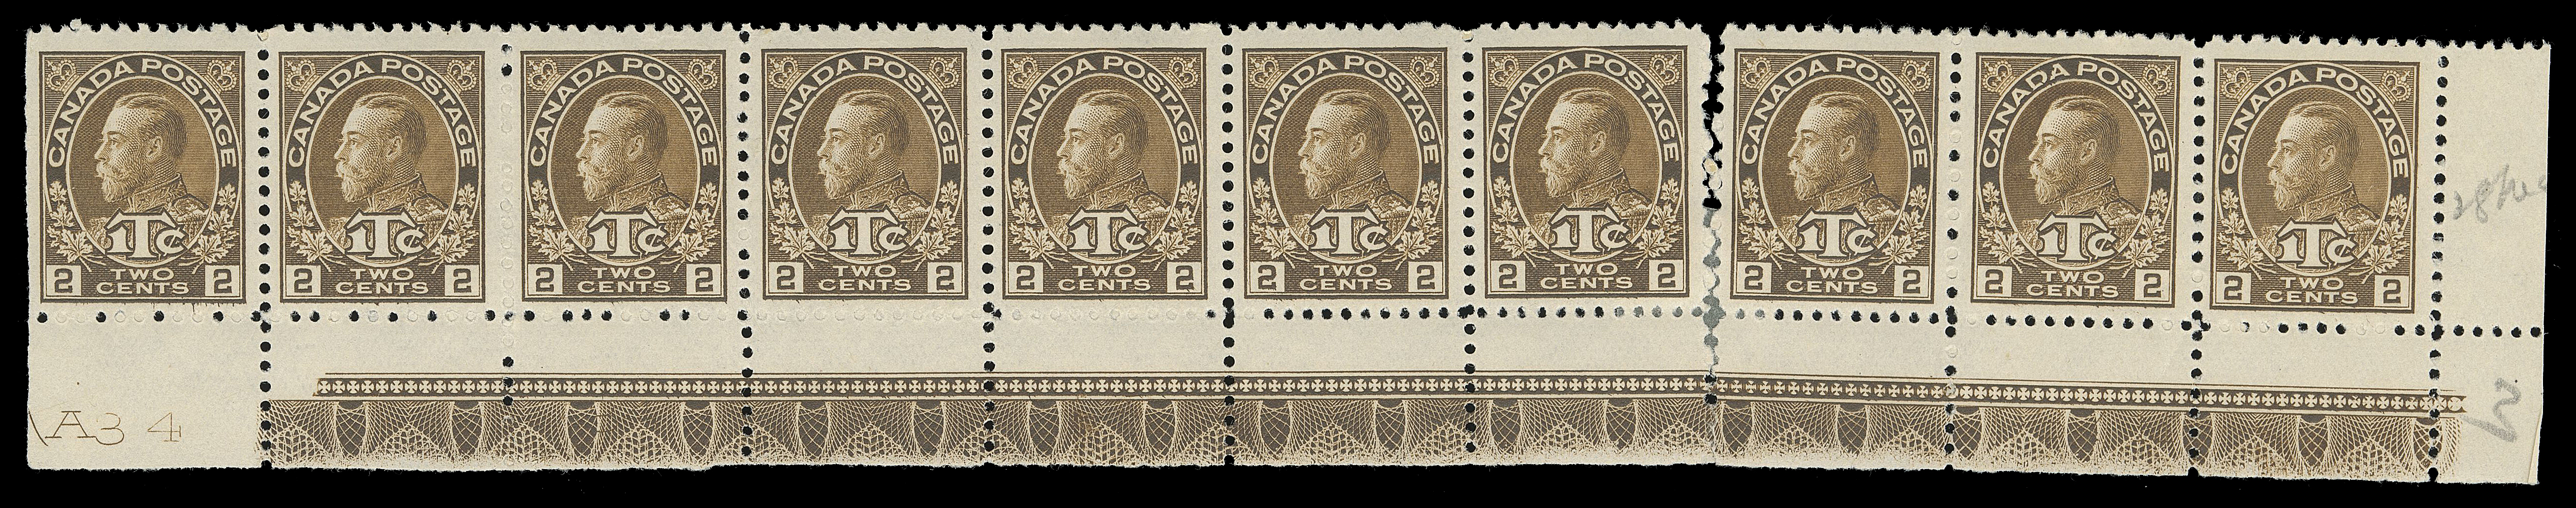 ADMIRAL STAMPS  MR4,A well centered lower right strip of ten, plate "A34" imprint below Position 91 and strong, full Type A lathework on others, the imprint "OTTAWA No A34" and printing order "937M" are visible under the lathework at Positions 92, 93 and 99; also prominent DOUBLE lathework (8mm wide) below Position 98. Perfs severed between seventh & eighth stamps supported by a hinge, straight edge stamp LH with extraneous ink mark on gum side at top; seven lathework stamps are choice NH, VF (Unitrade cat. $5,200)